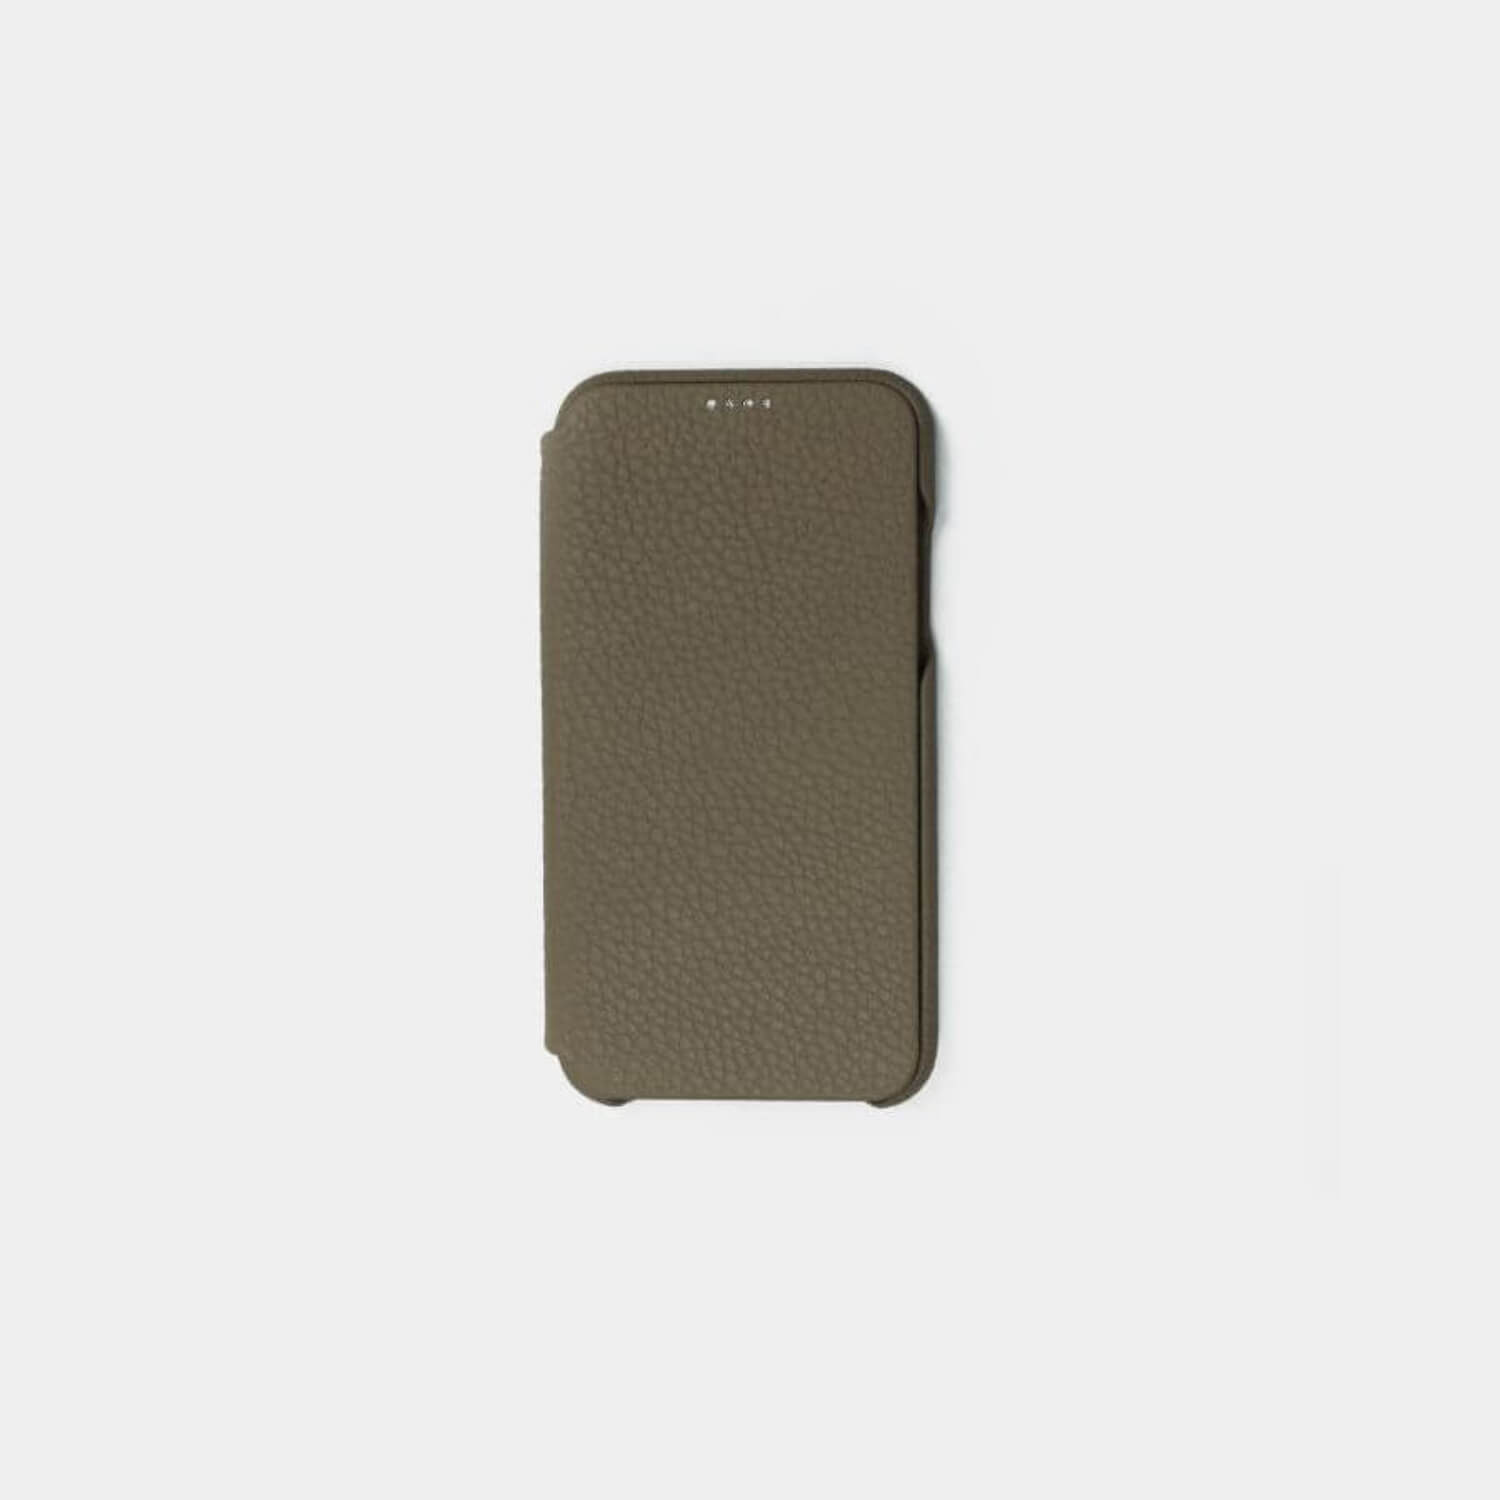 Pebble grain leather phone flip over screen cover and case to protect the phone for all models with one card slot